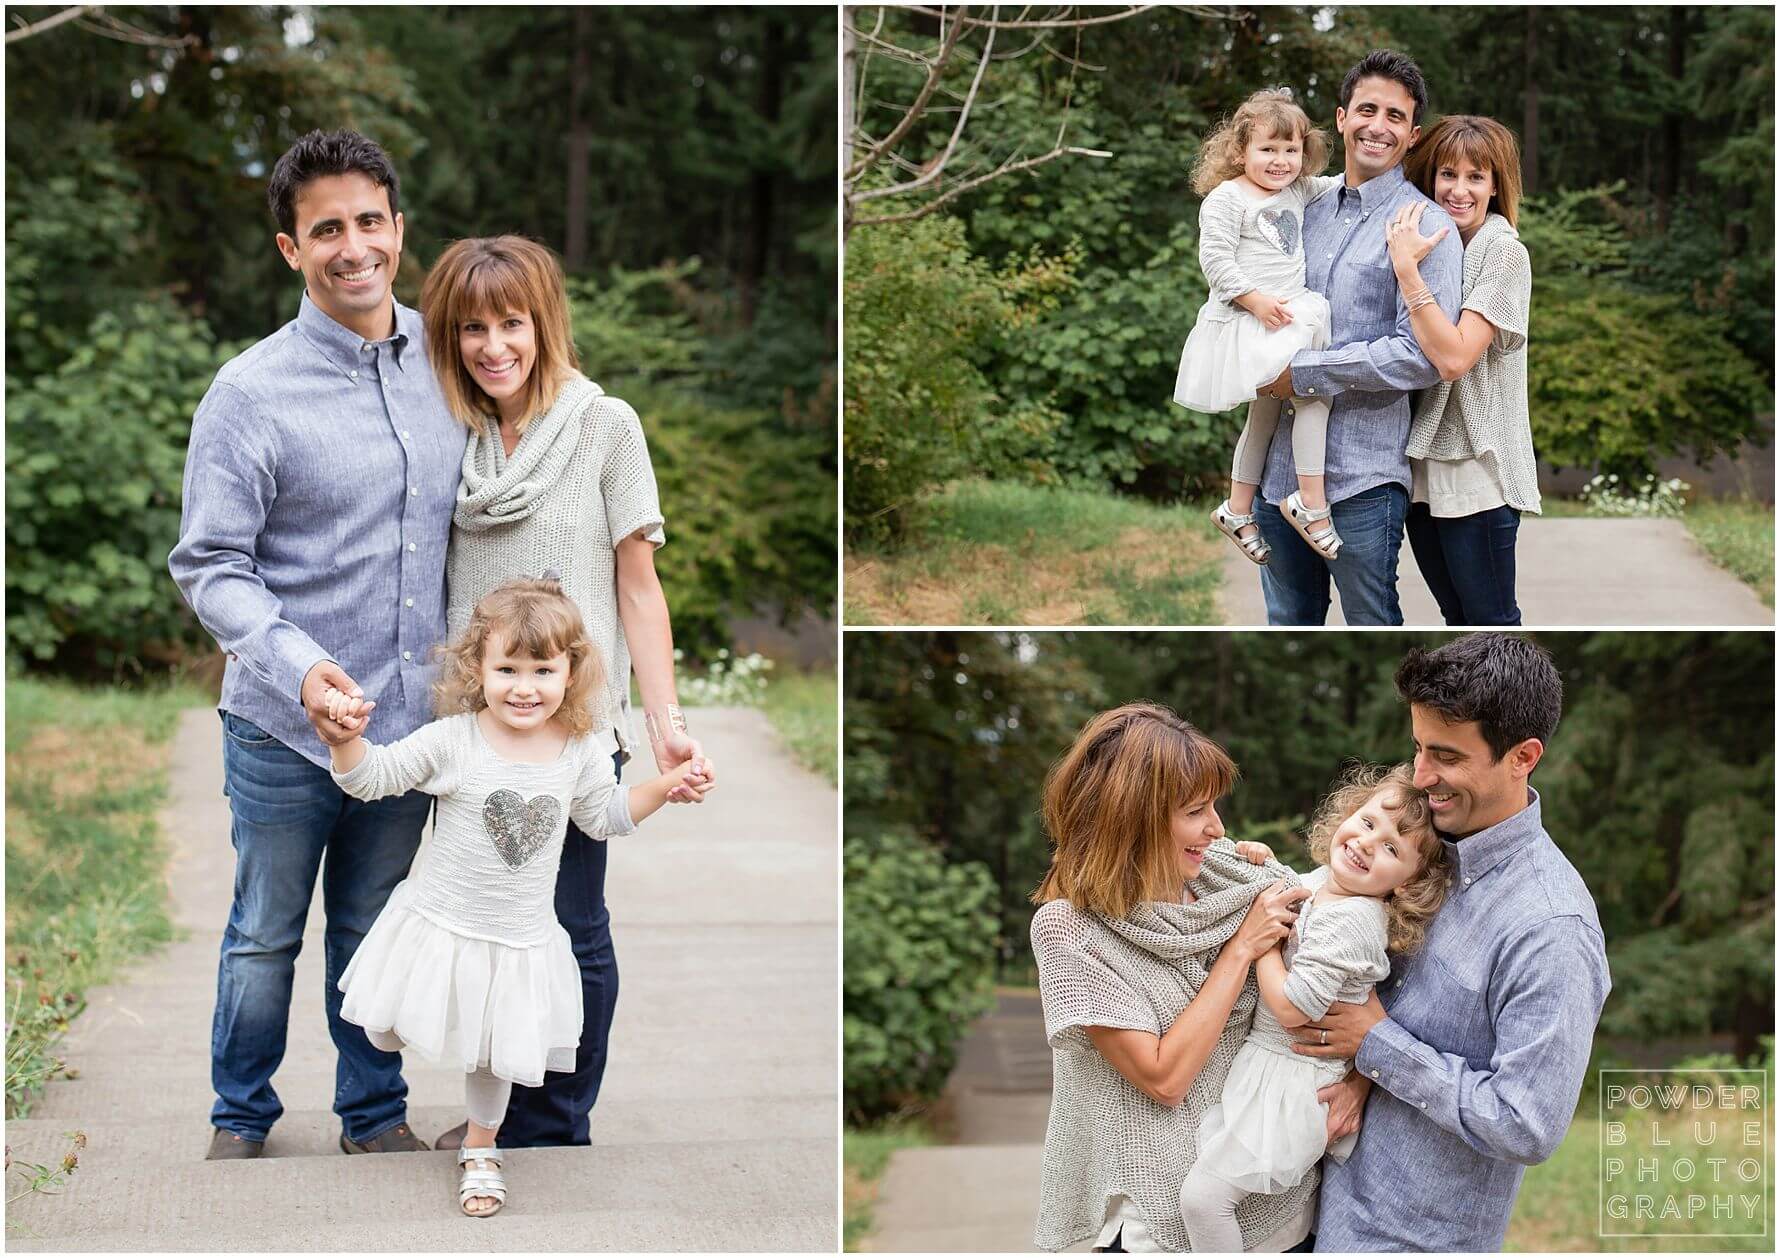 pittsburgh family photography family session at mt tabor park in portland oregon pine trees 3 year old girl butterfly wings